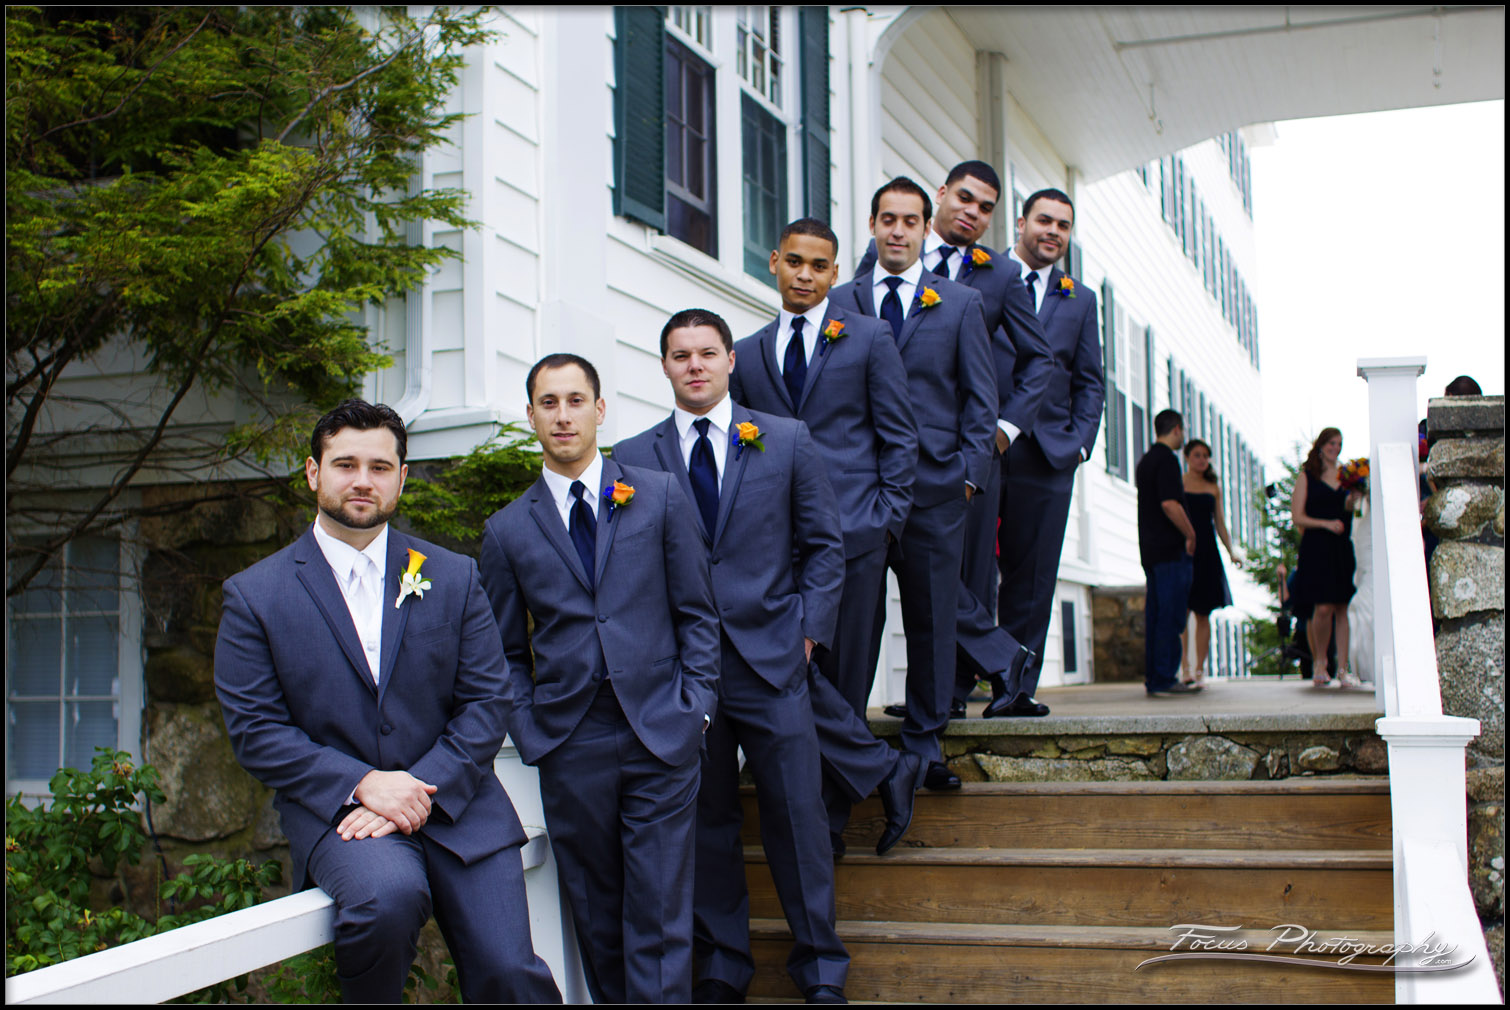 Wedding photography at Colony Hotel in Maine